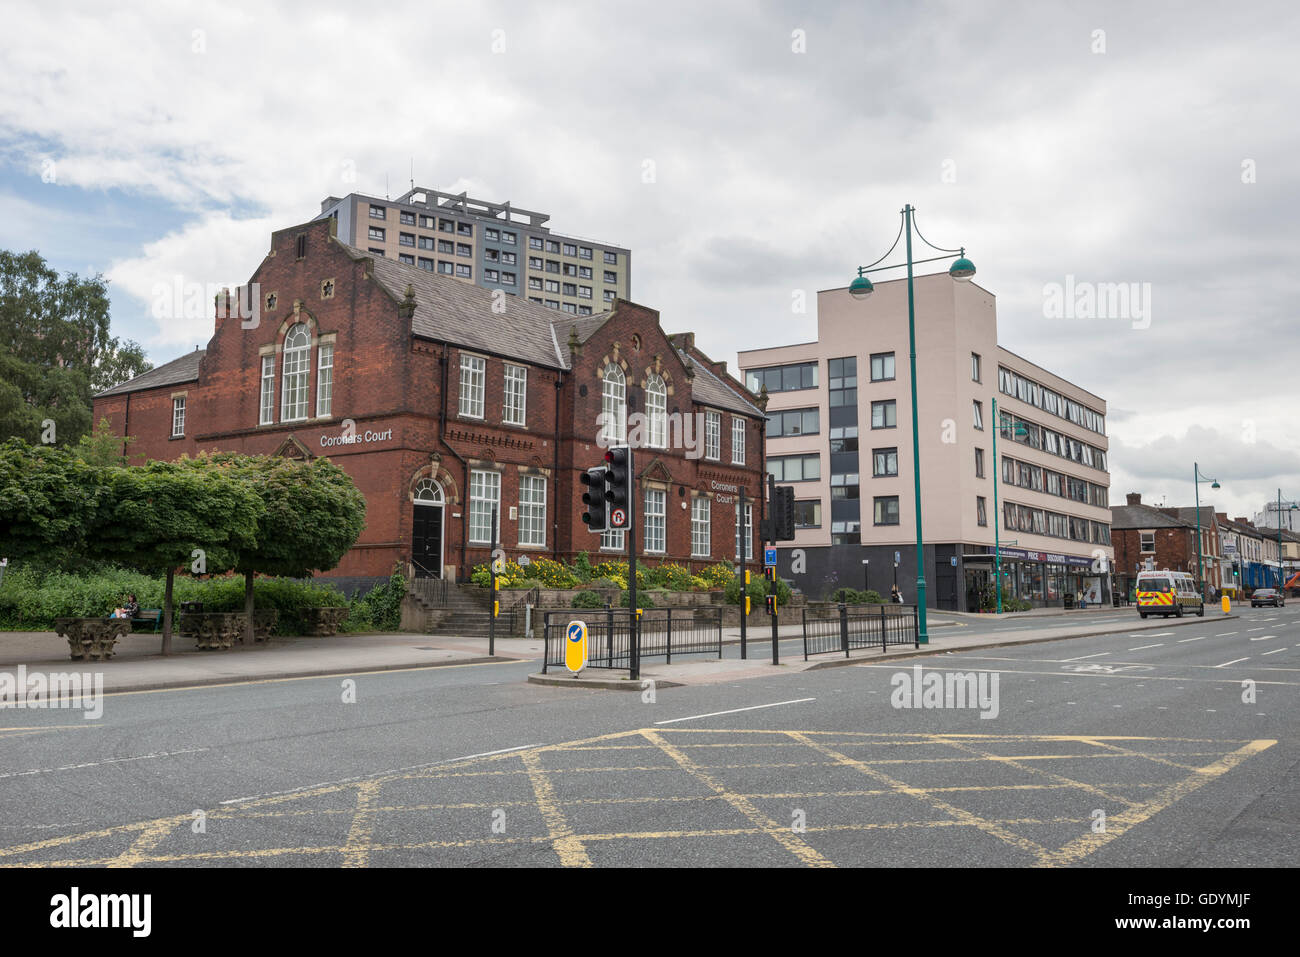 The Coroners court on the A6 in the town of Stockport, Greater Manchester, England. Stock Photo